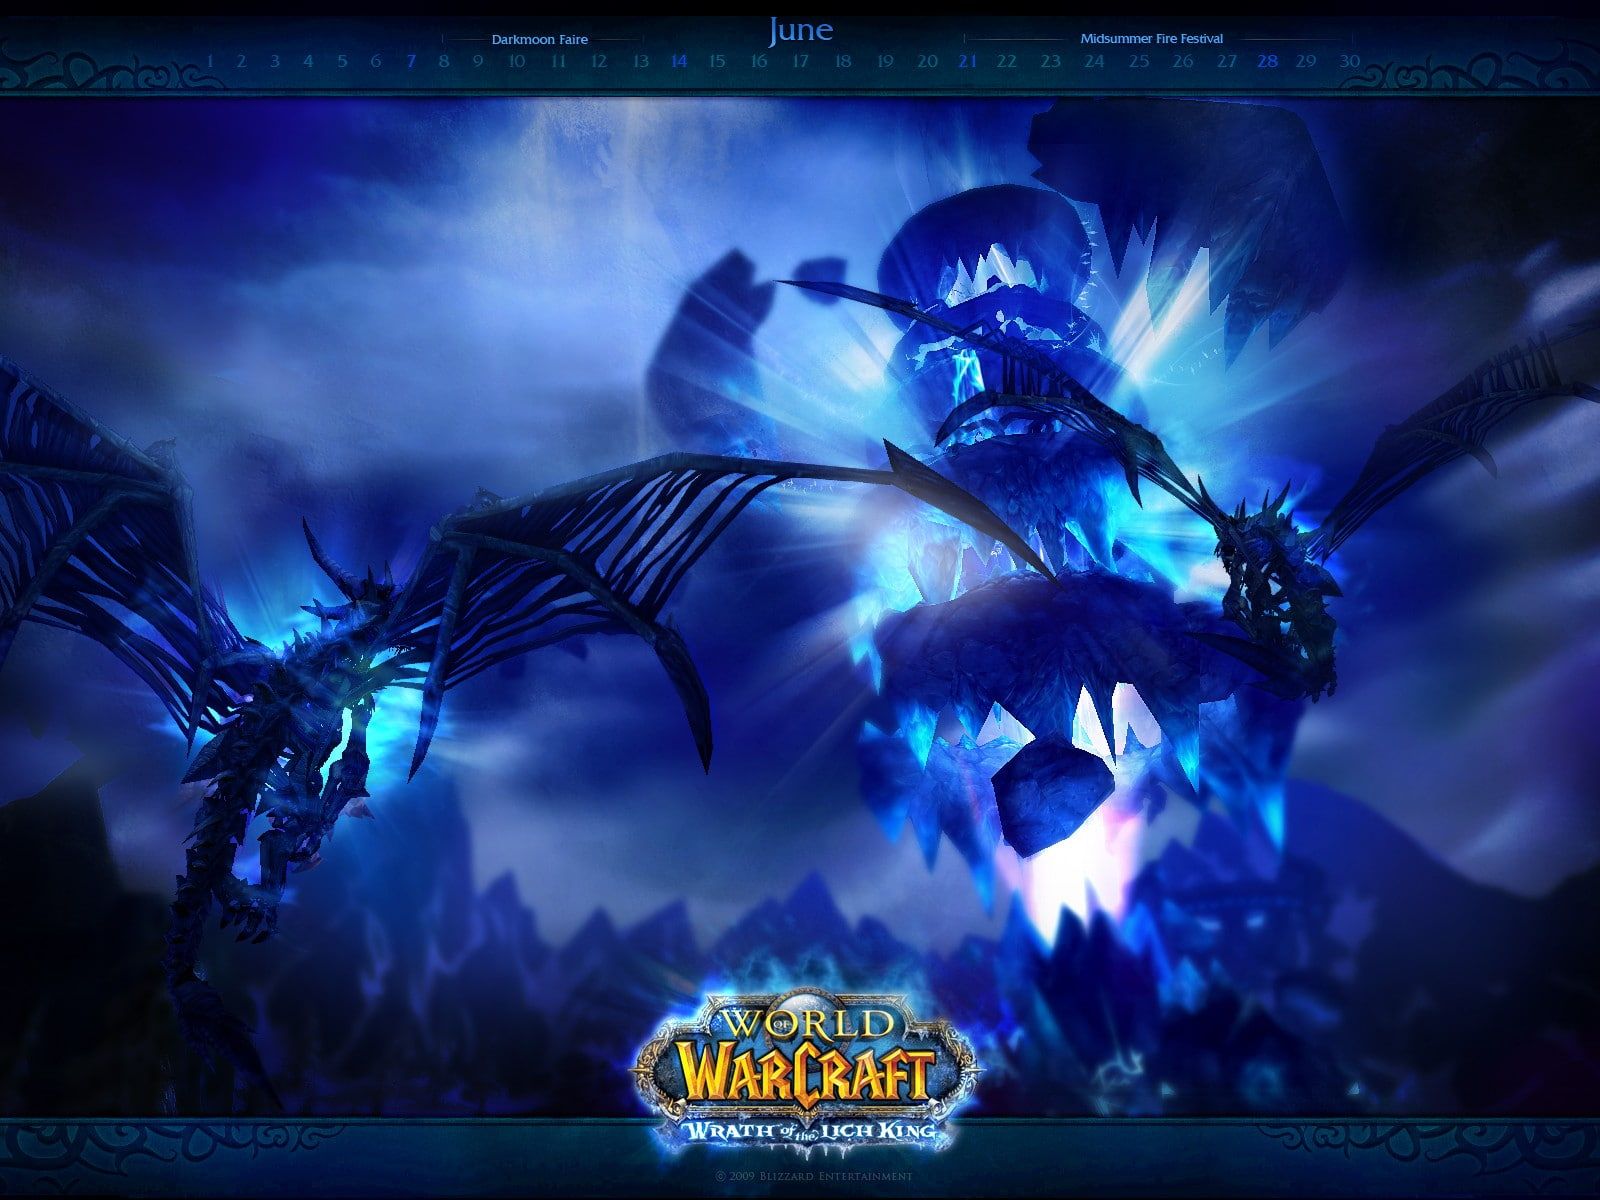 World of warcraft world of warcraft wrath of the lich kg dragon video games p wallpaper hdwallâ world of warcraft warcraft world of warcraft wallpaper